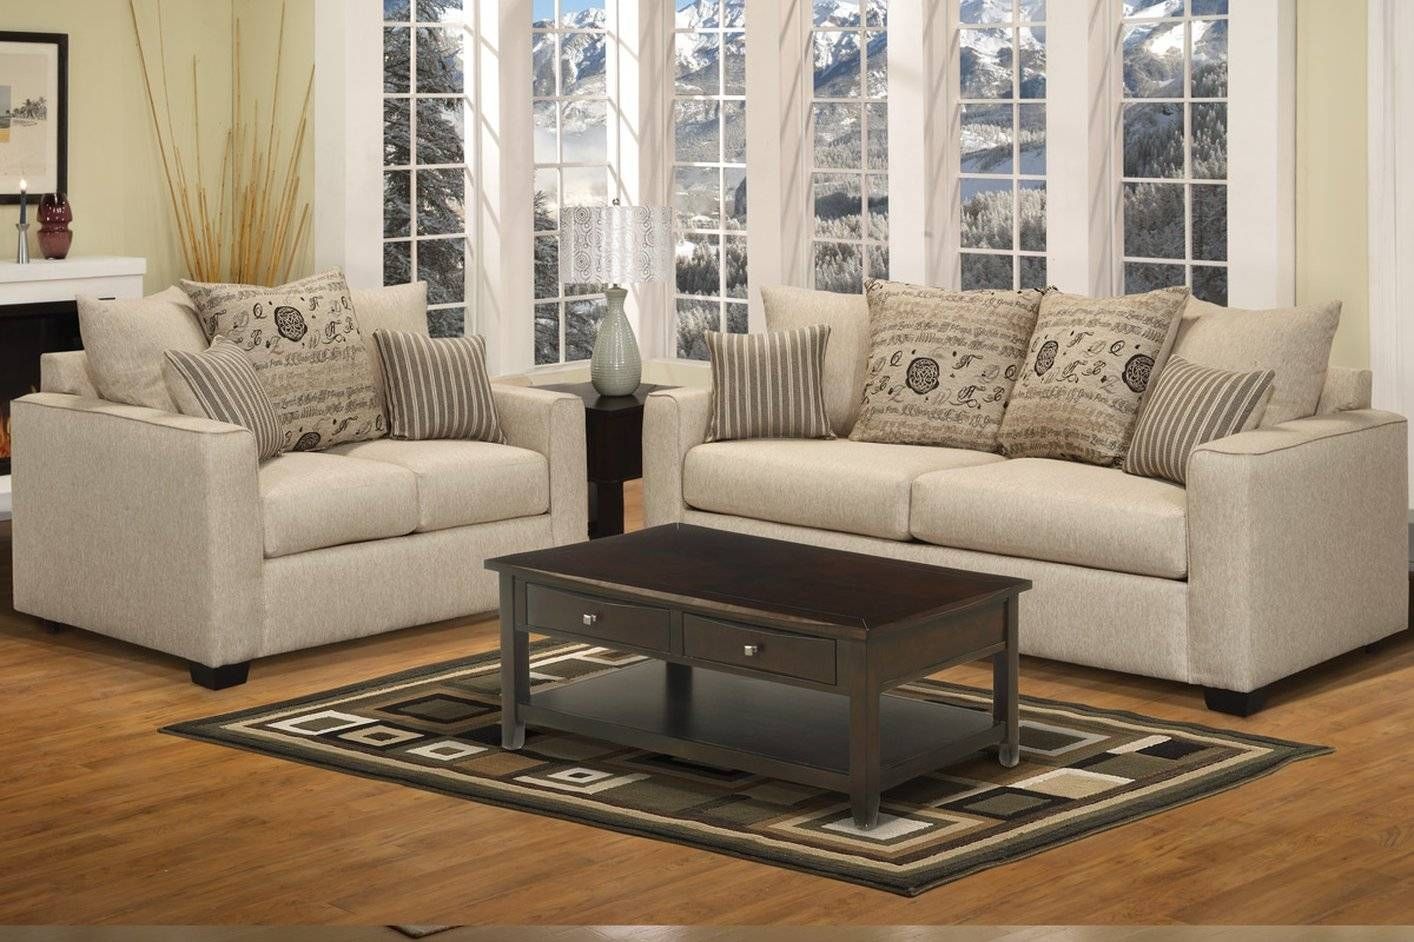 Sofa & Loveseat Set – Steal A Sofa Furniture Outlet Los Angeles Ca With Regard To Sofa Loveseat And Chairs (View 6 of 30)